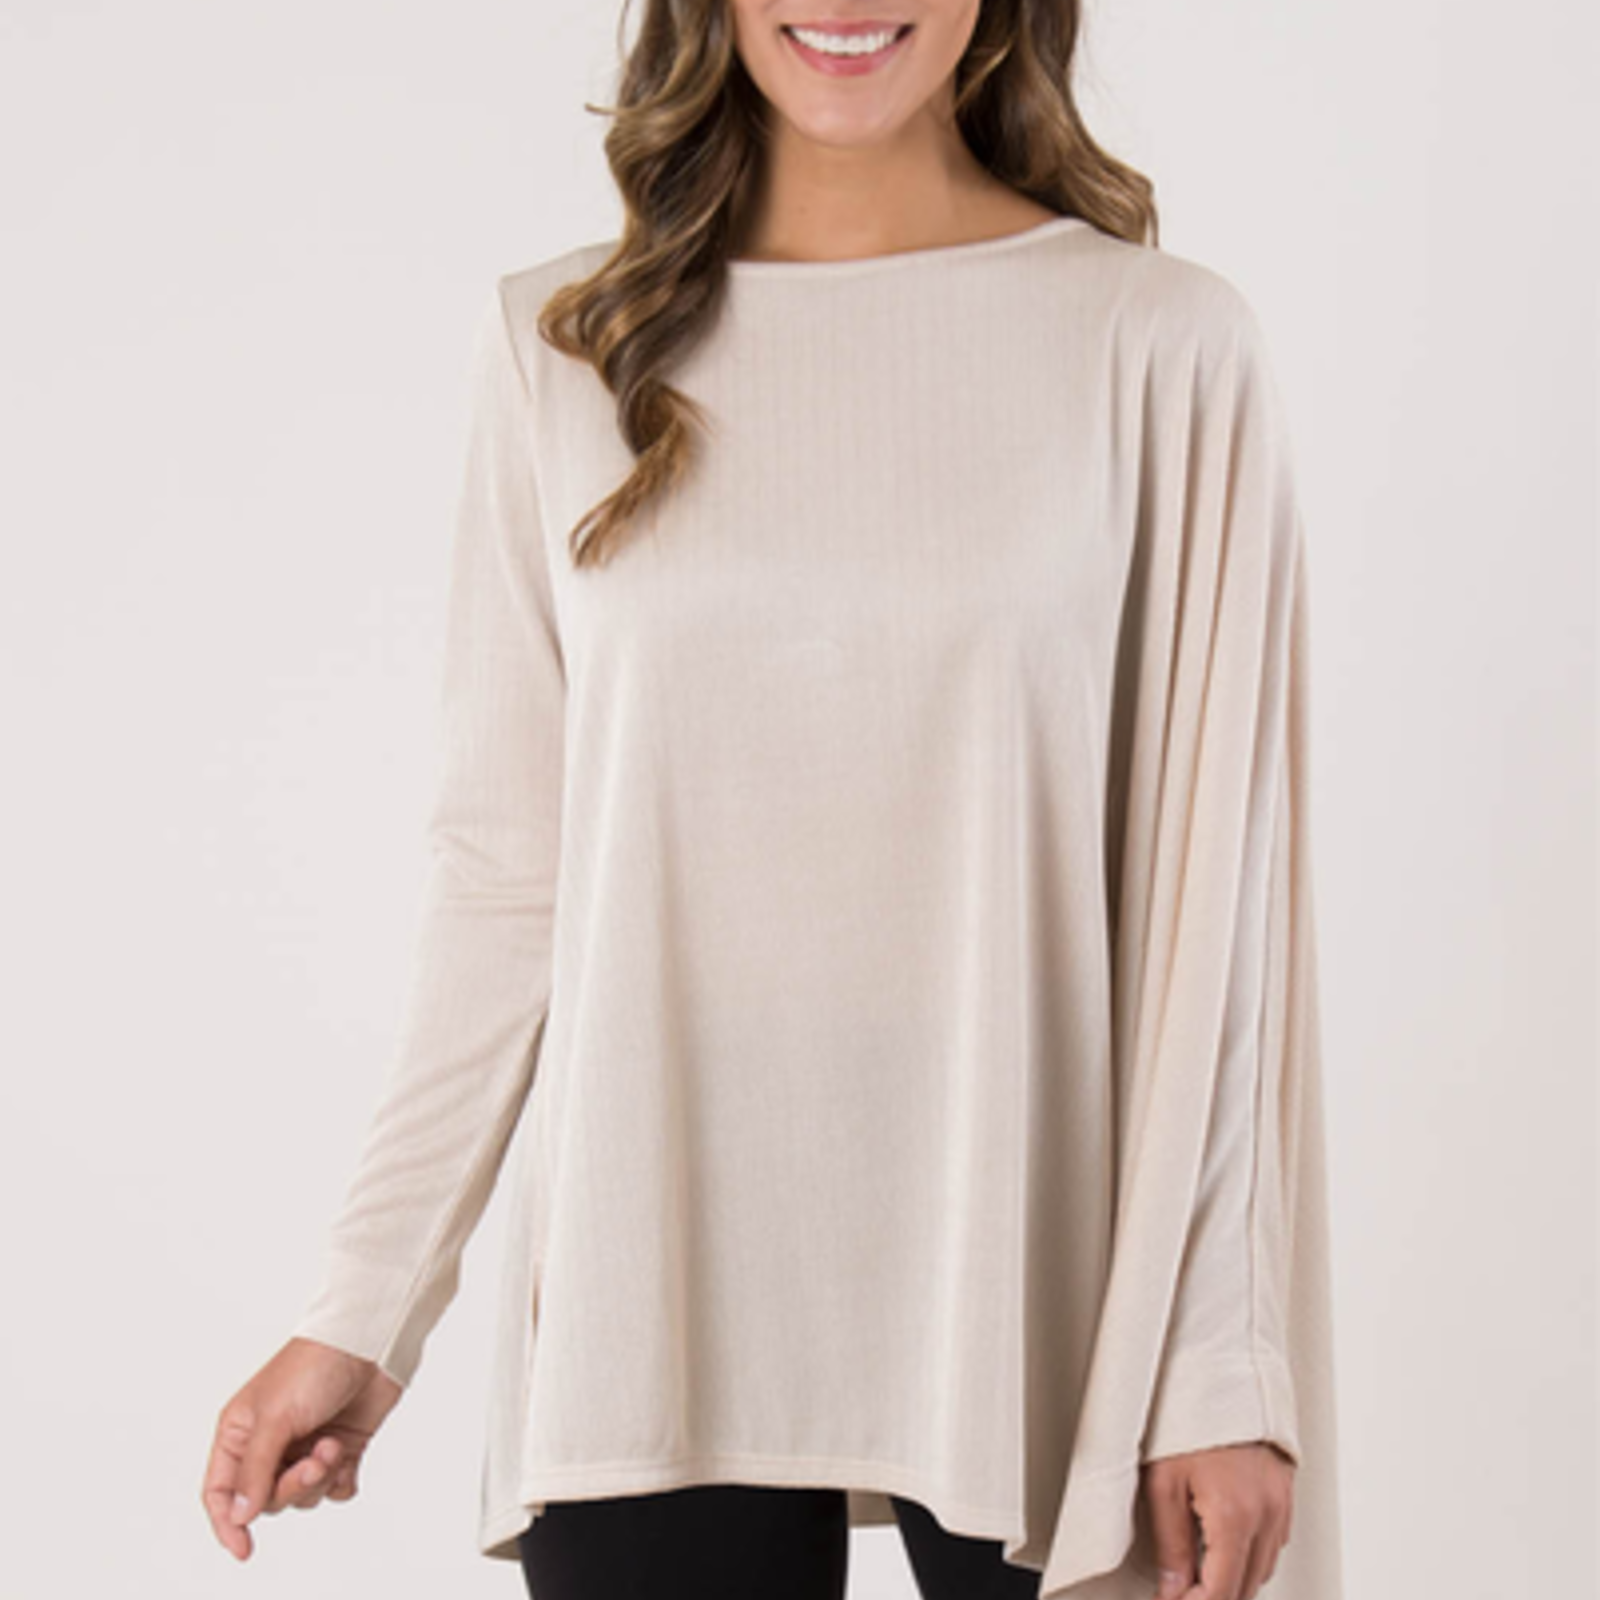 Simply Noelle Cape Sleeve Top - S/M     TOP8001SM loading=